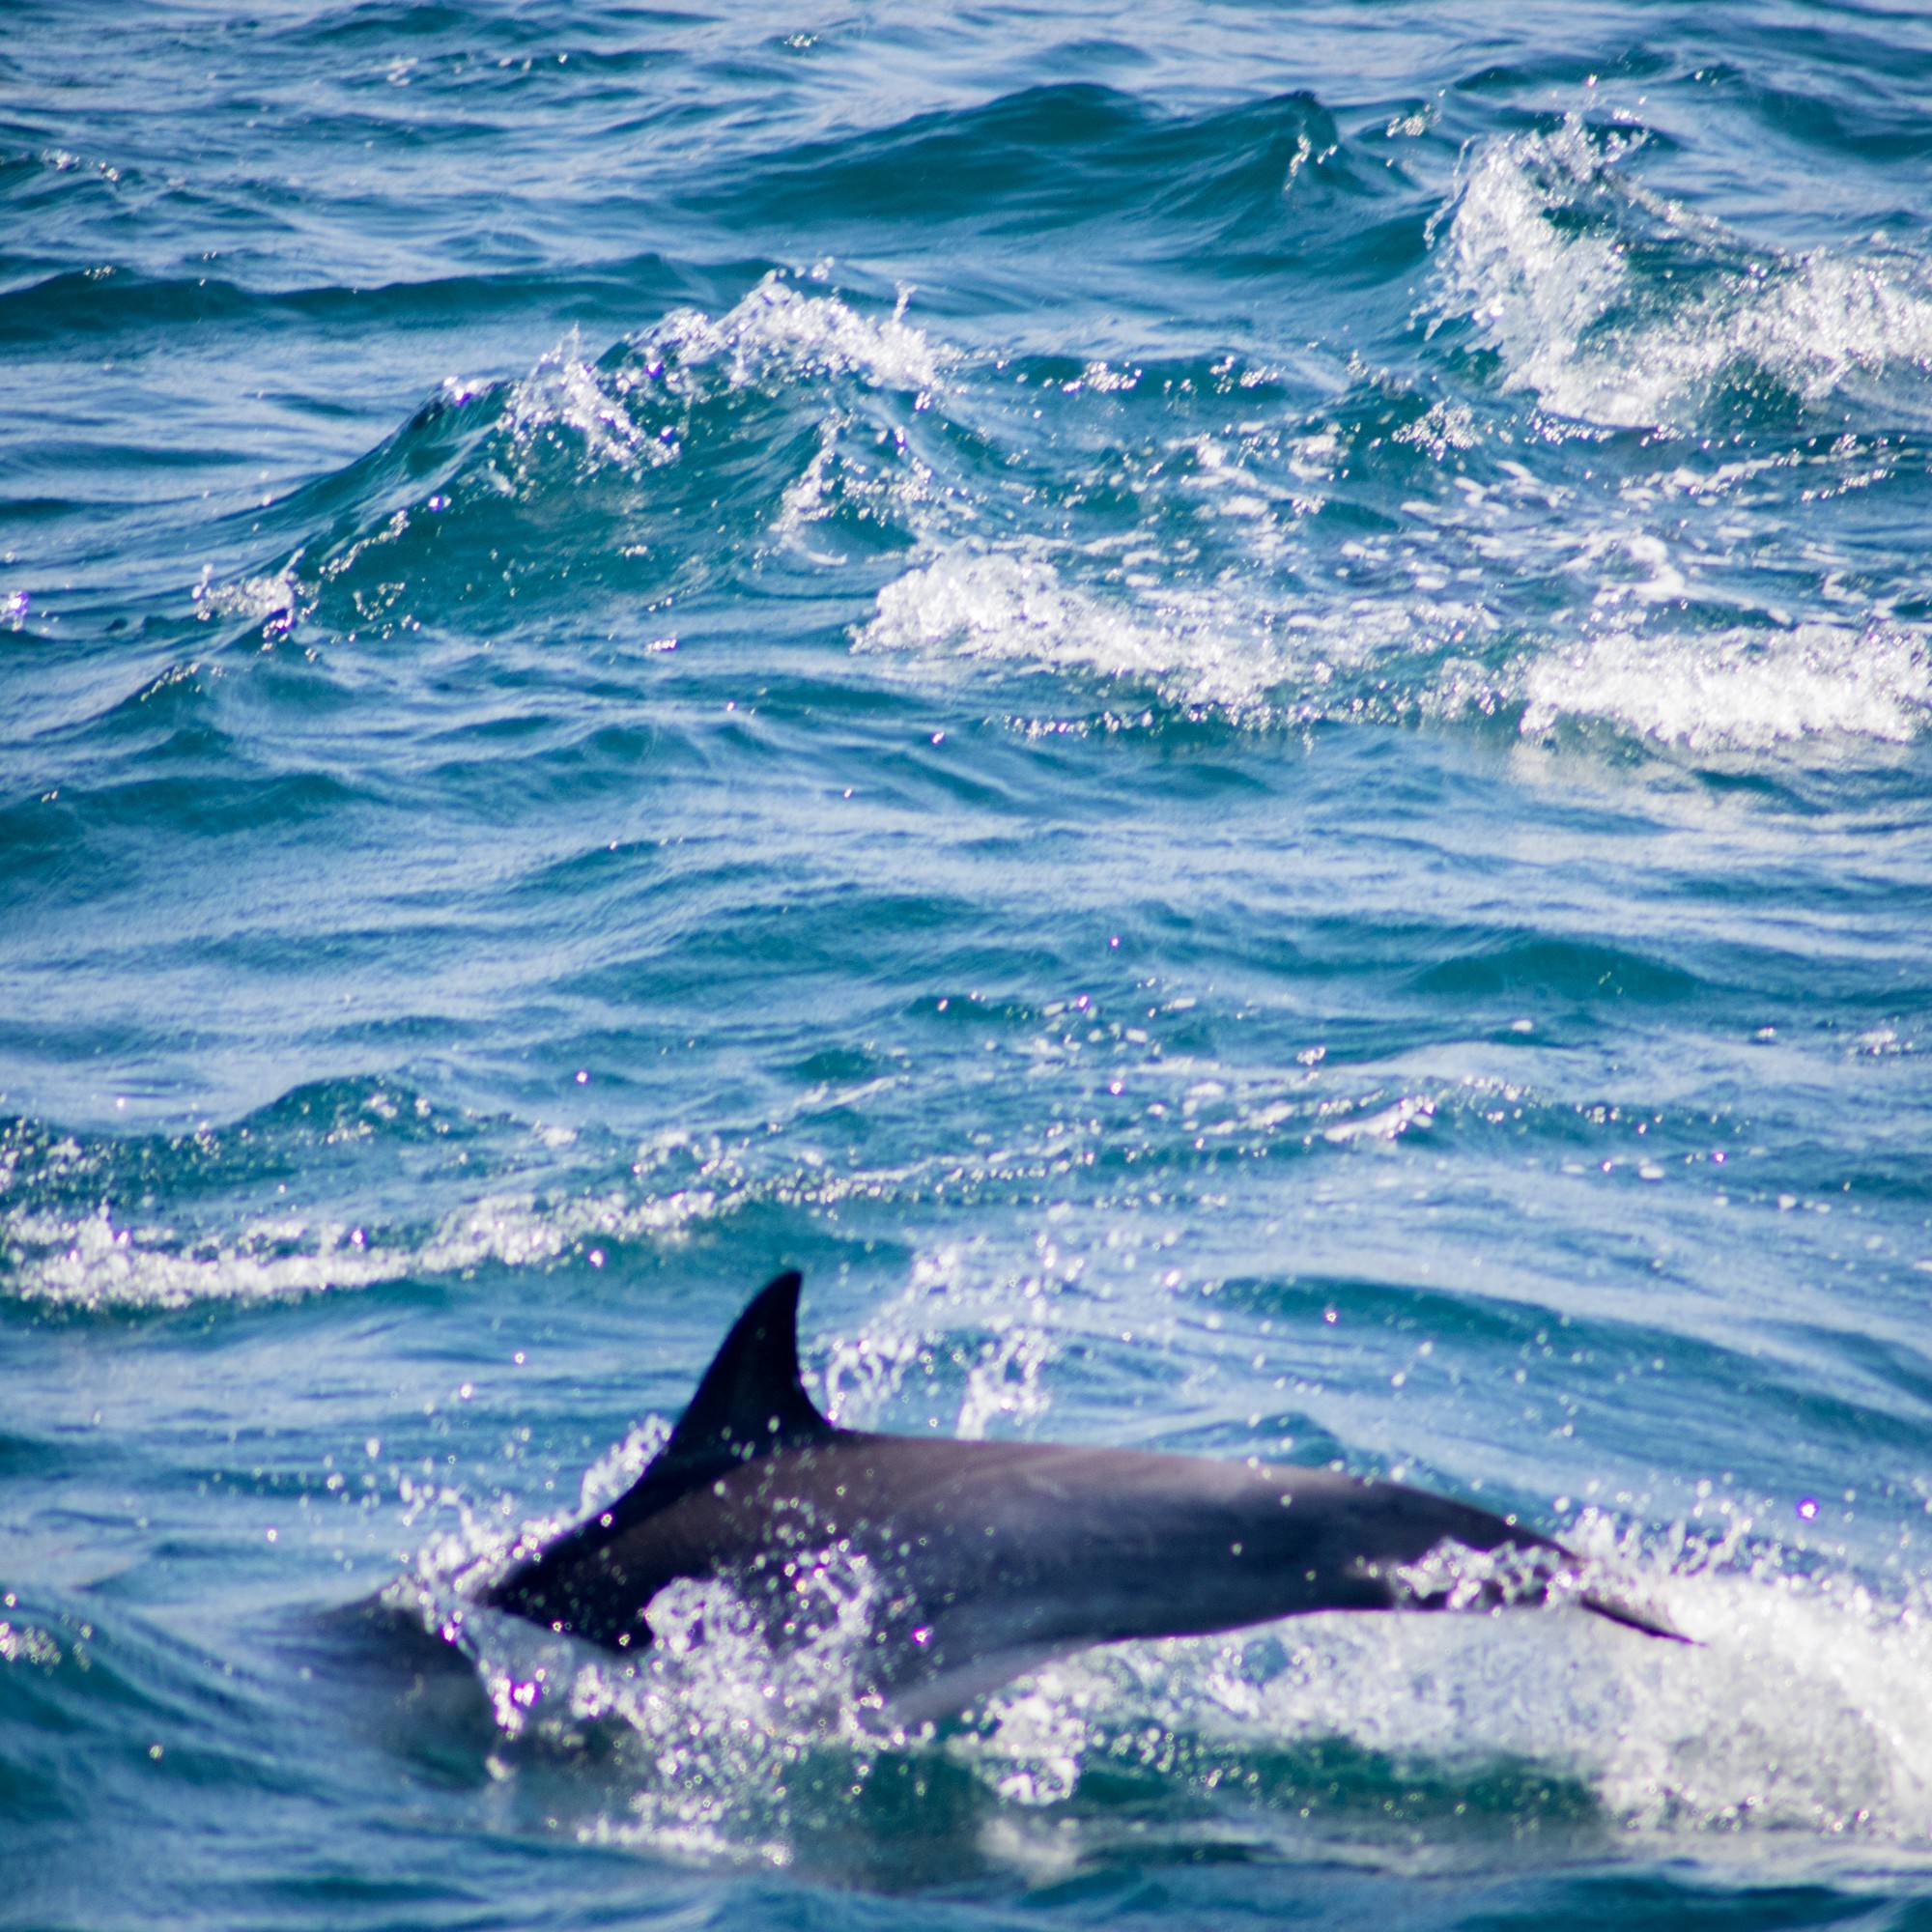 Dolphins in the sea of cortez